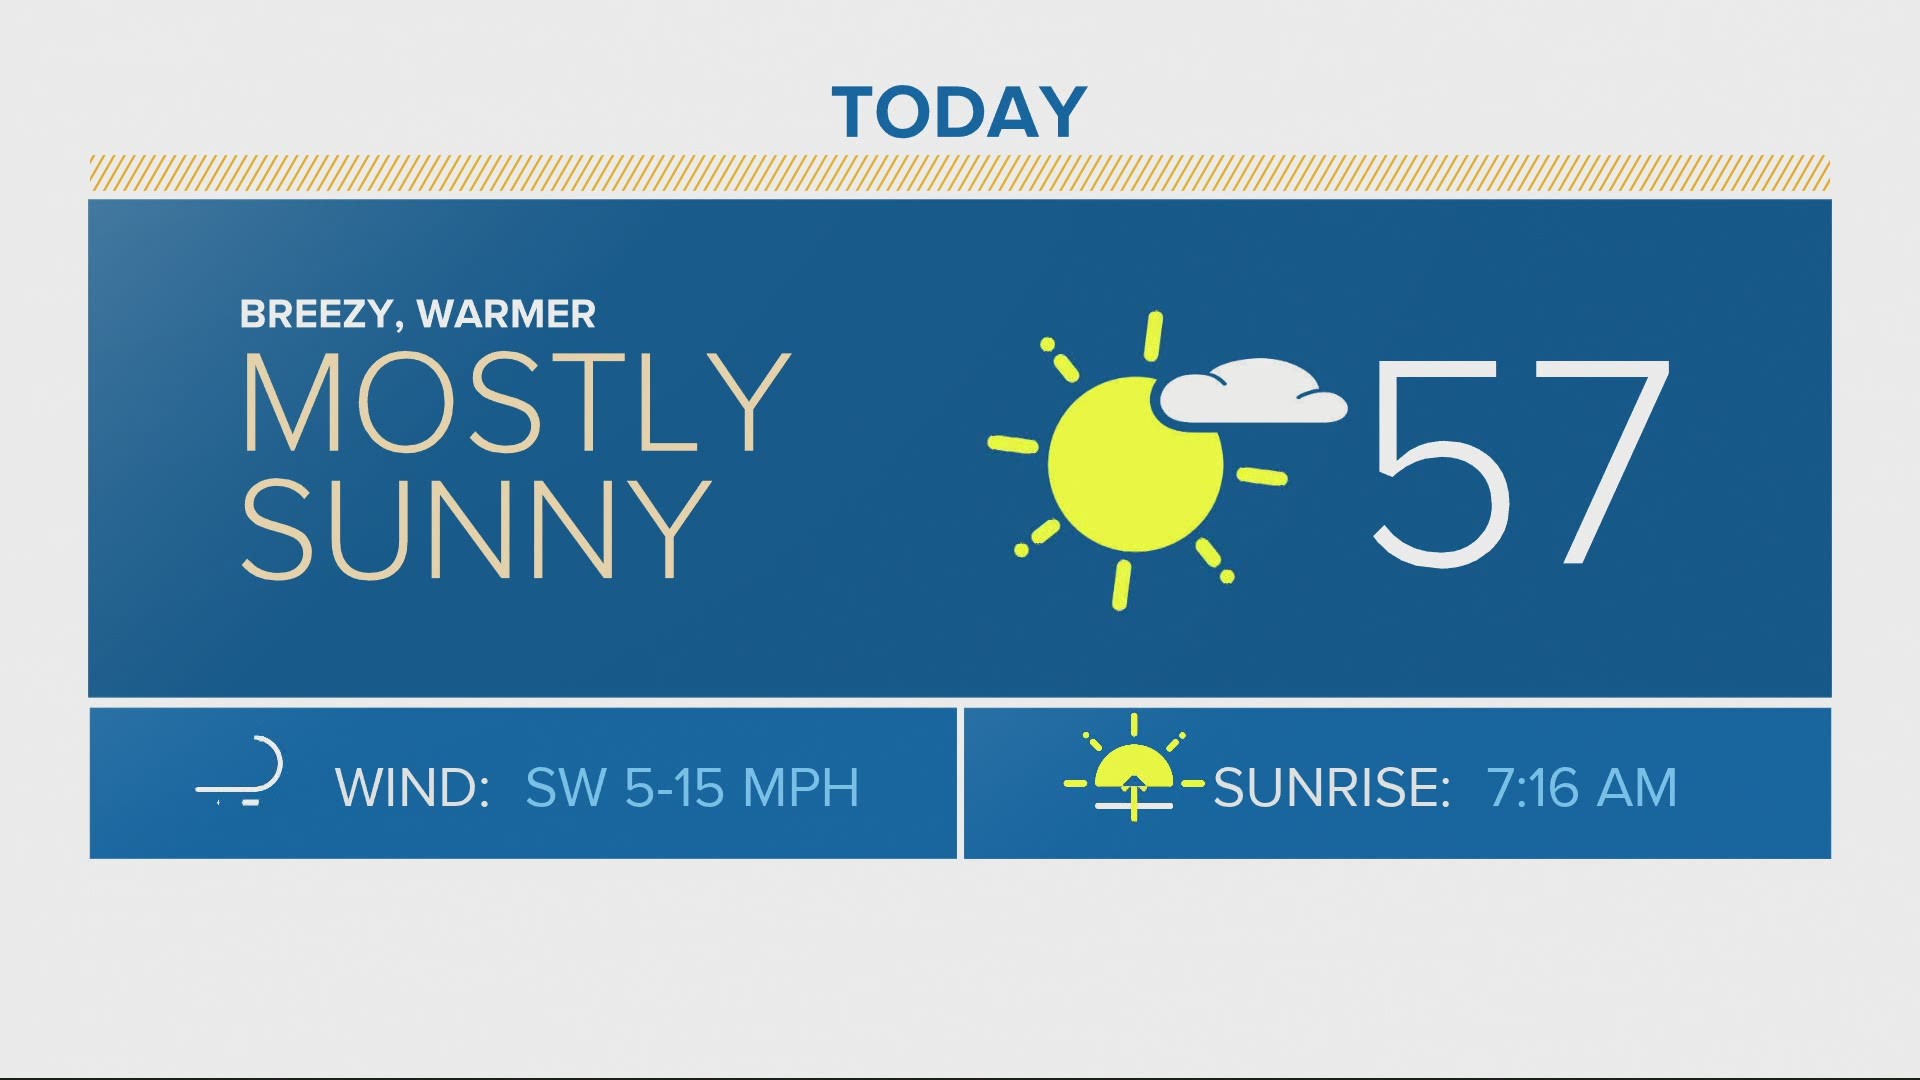 Mostly sunny, breezy and much warmer. Morning lows will be from 18 to 23, afternoon highs from 54 to 59.